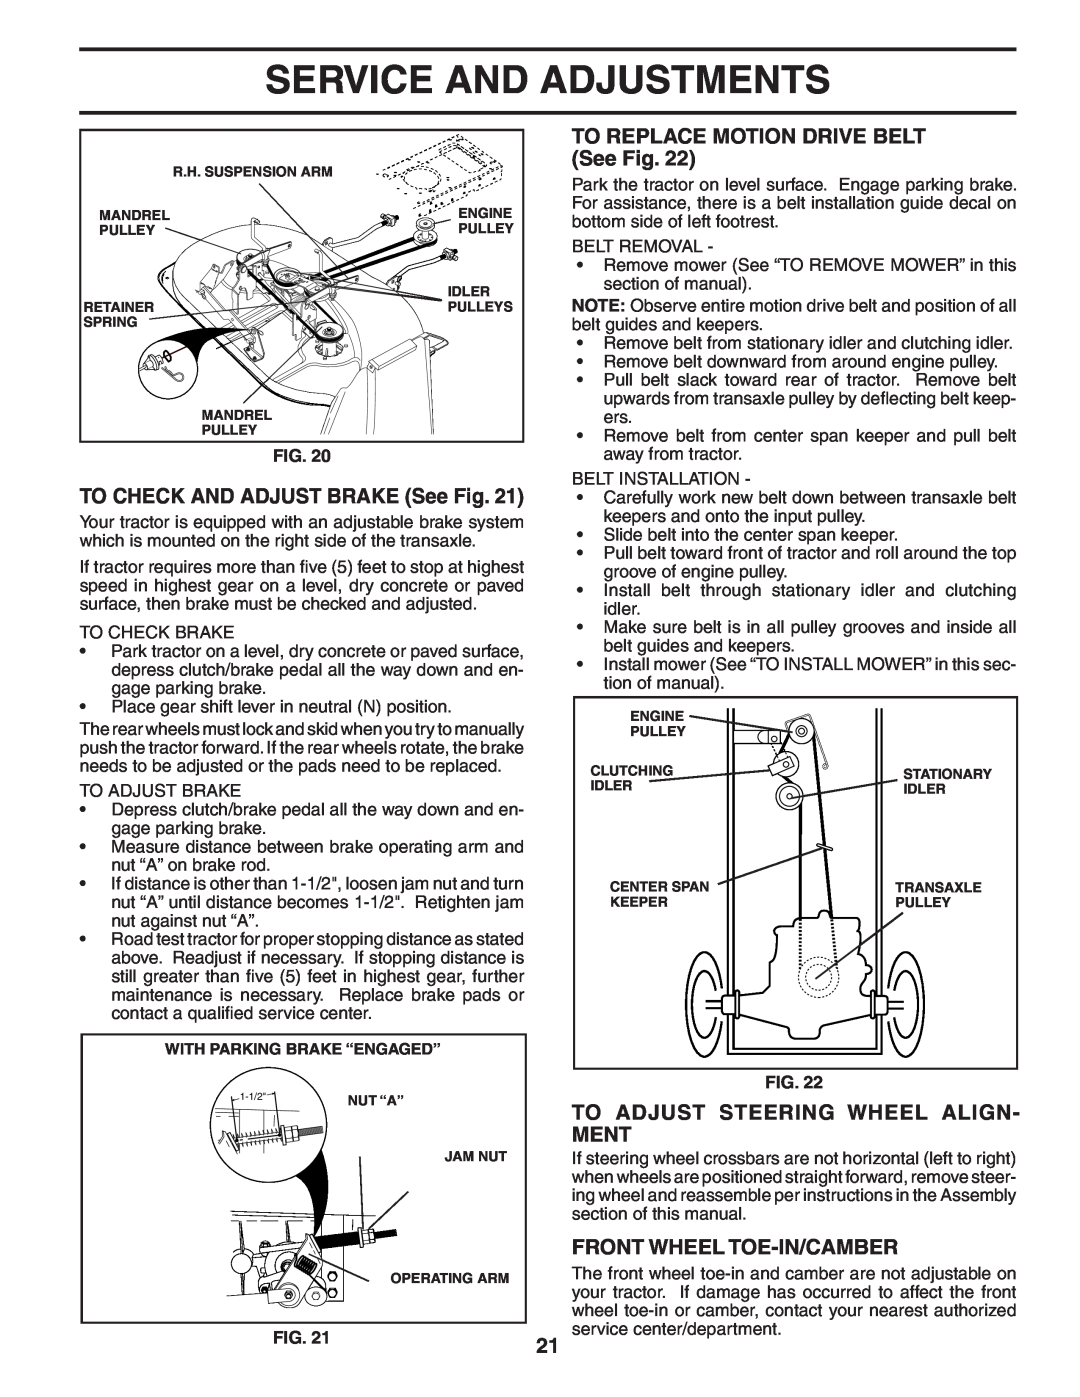 Weed Eater 186778 manual TO CHECK AND ADJUST BRAKE See Fig, TO REPLACE MOTION DRIVE BELT See Fig, Front Wheel Toe-In/Camber 